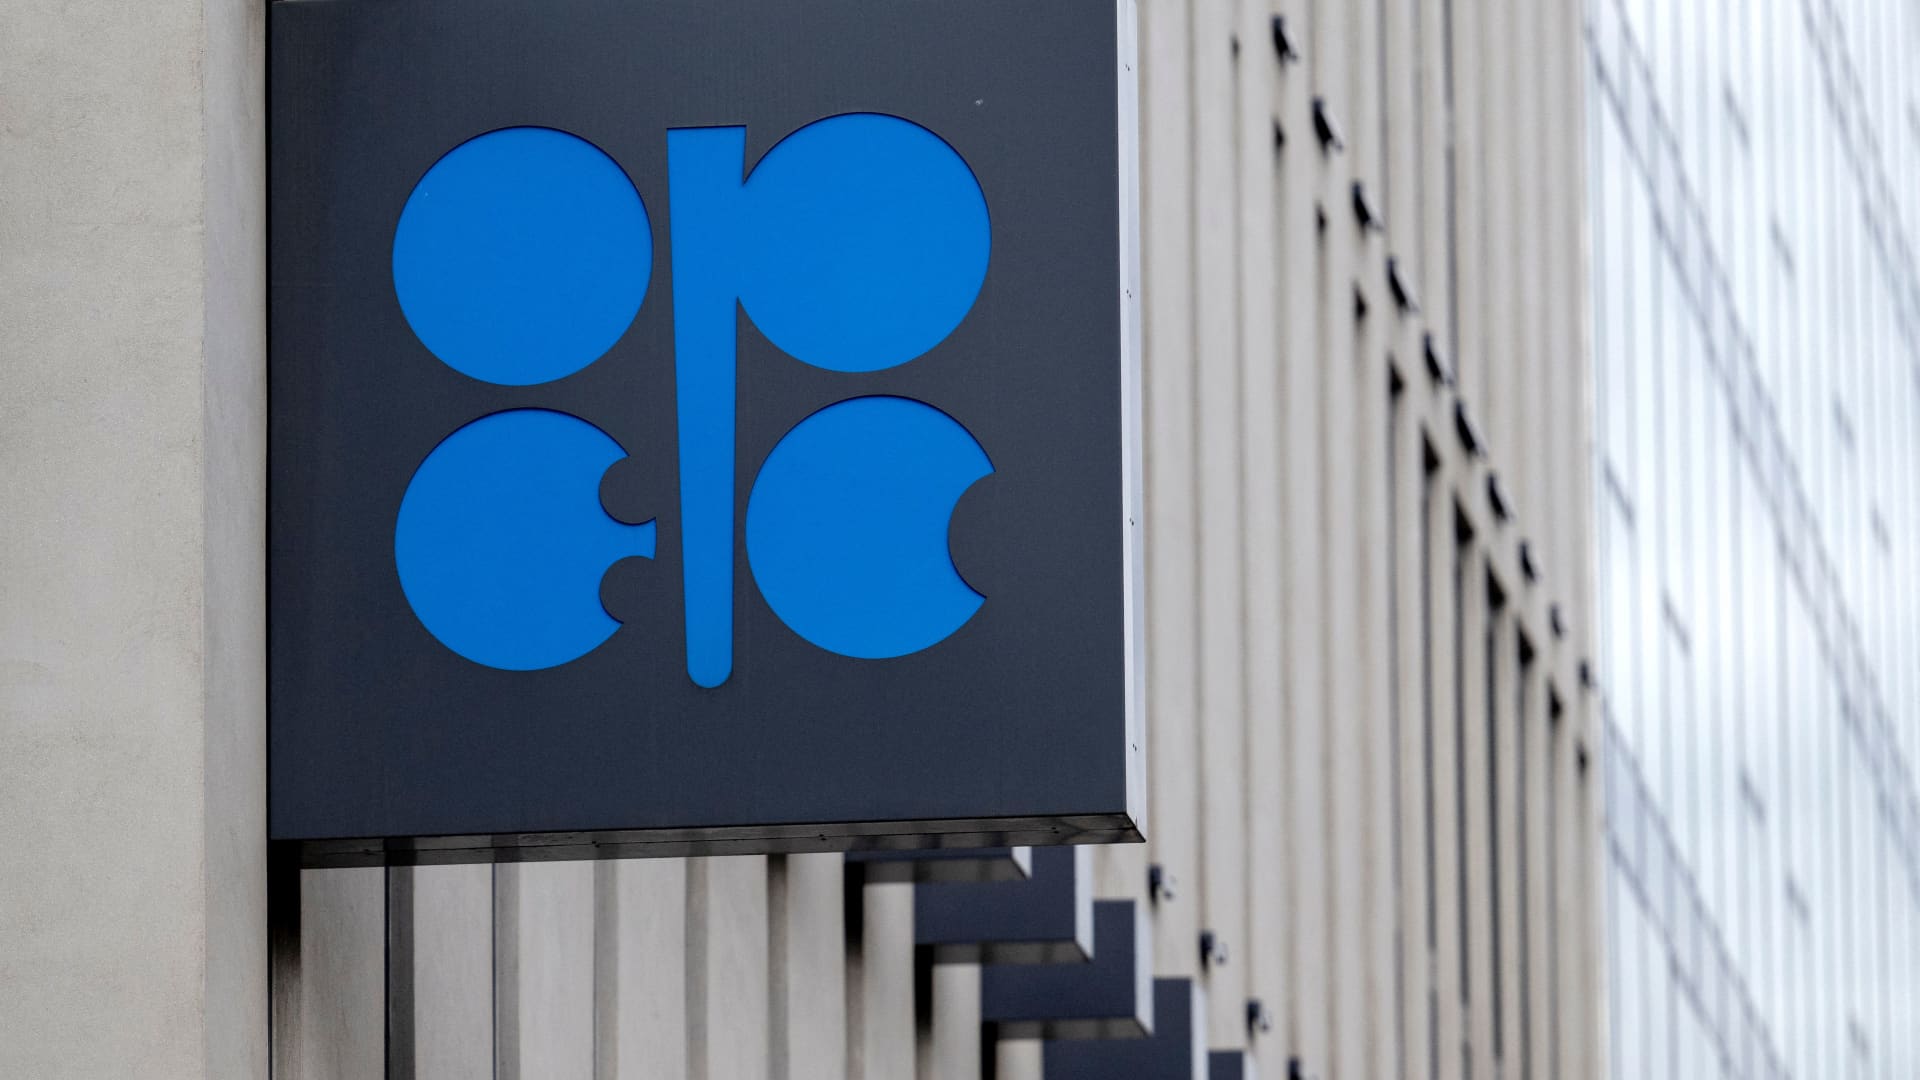 OPEC+ committee recommends no change in oil output policy at virtual meeting